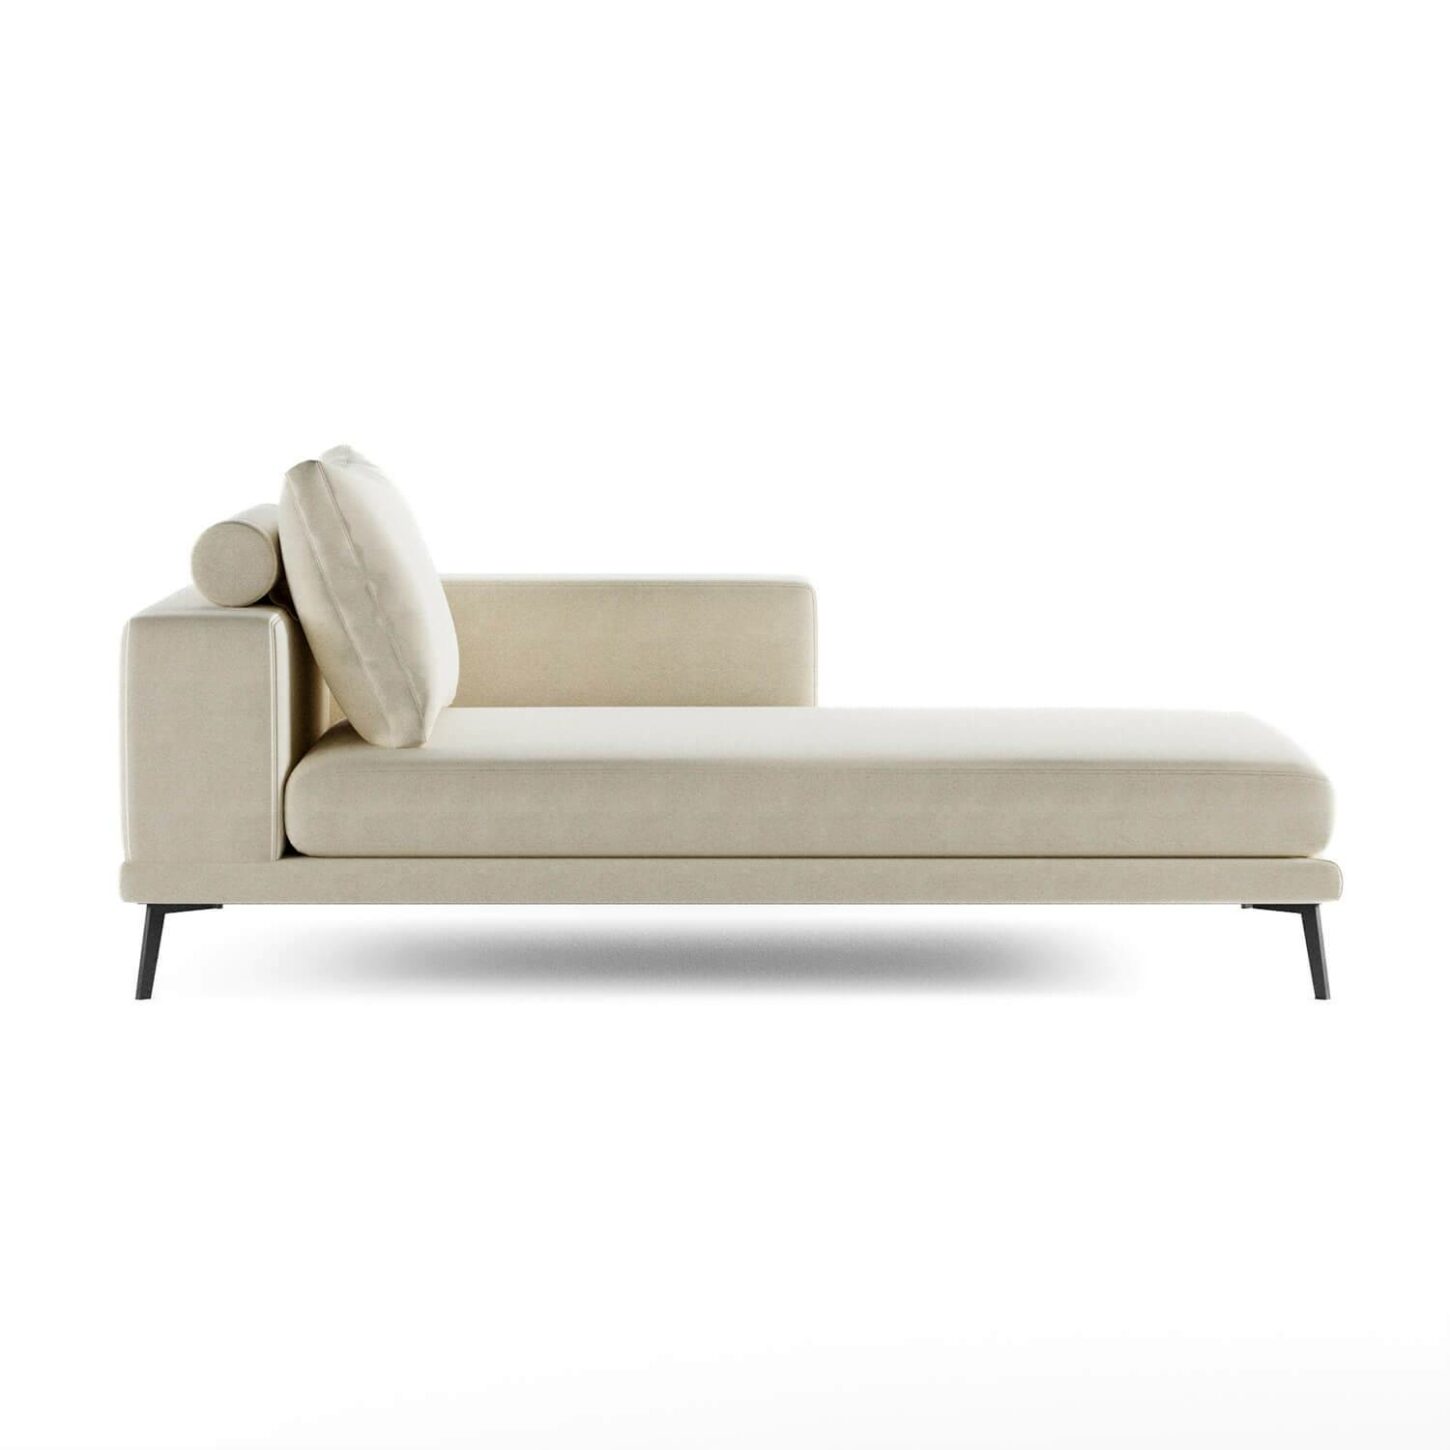 Enzo Chaise Lounger